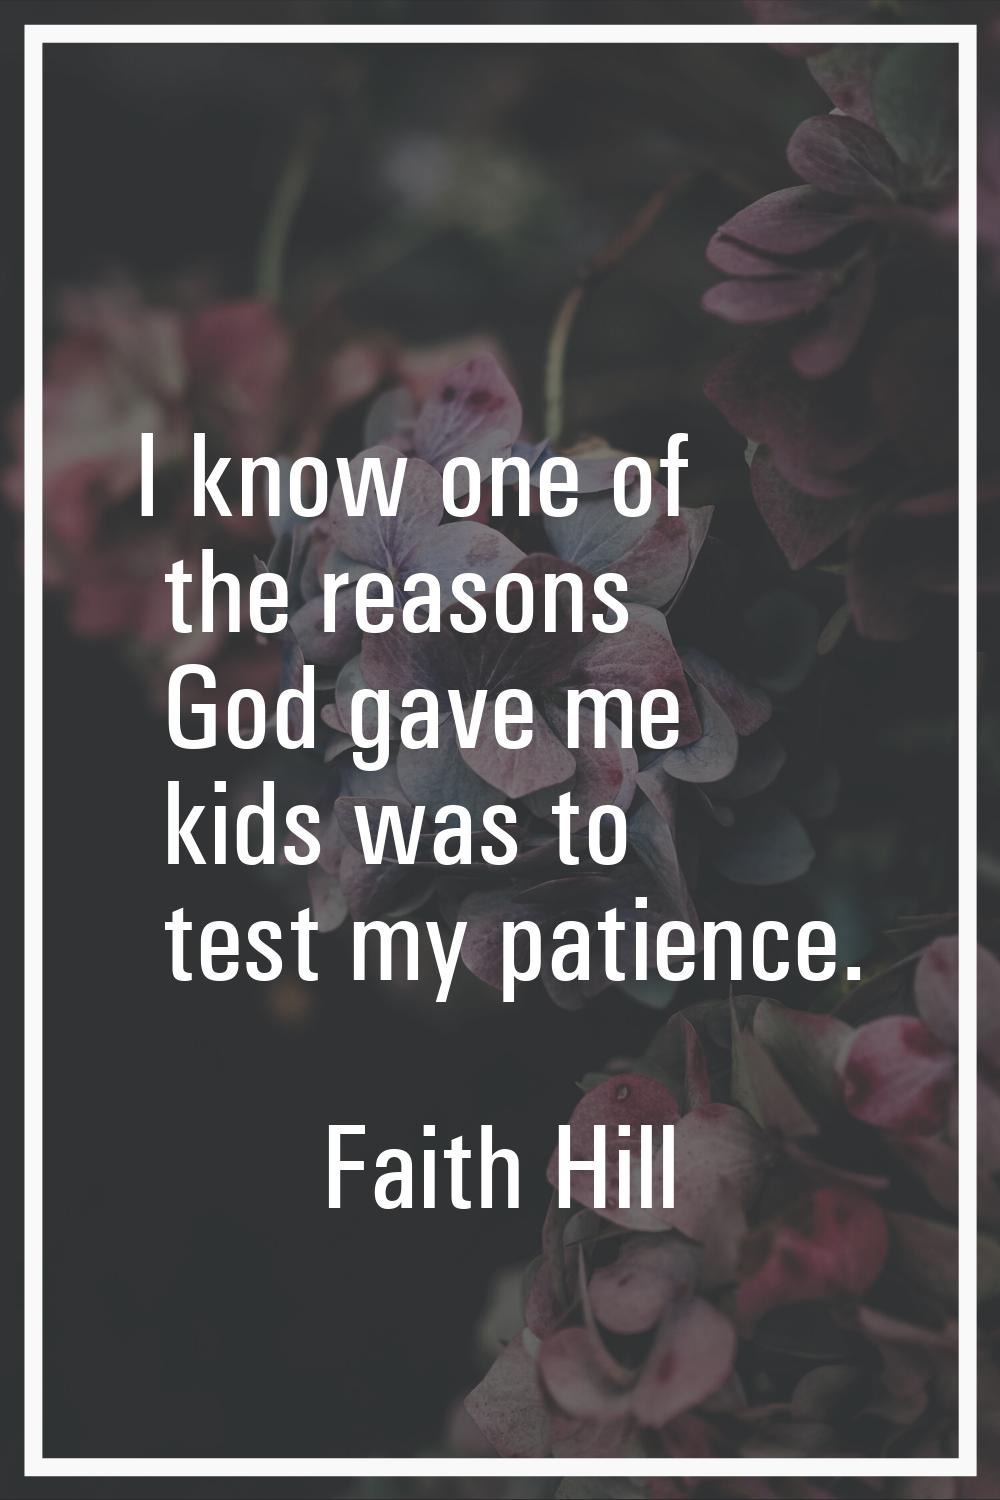 I know one of the reasons God gave me kids was to test my patience.